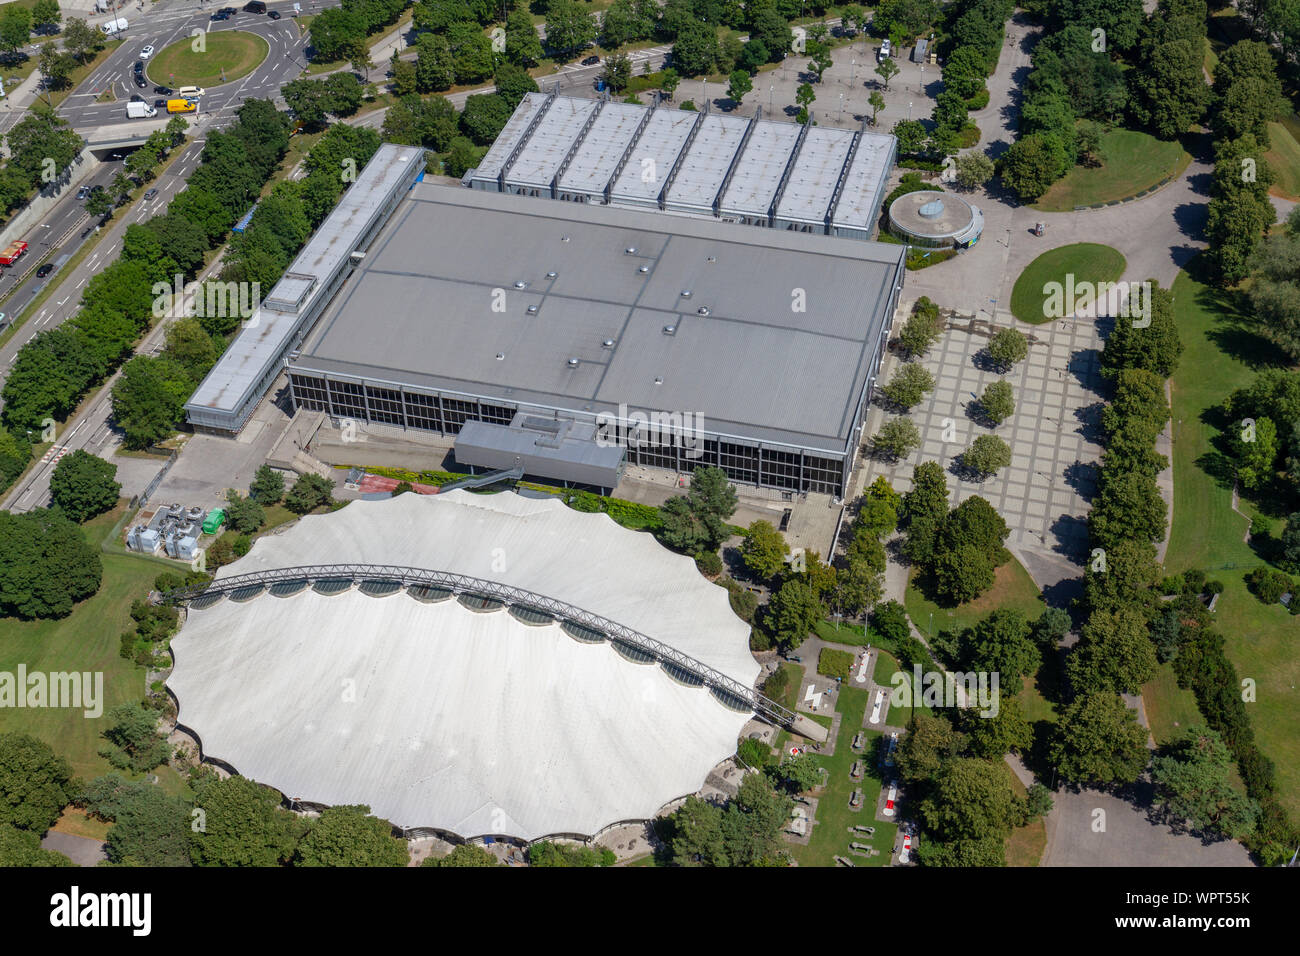 The SoccArena and Olympia Eishalle from the Olympiaturm (Olympic Tower), Munich, Bavaria, Germany. Stock Photo